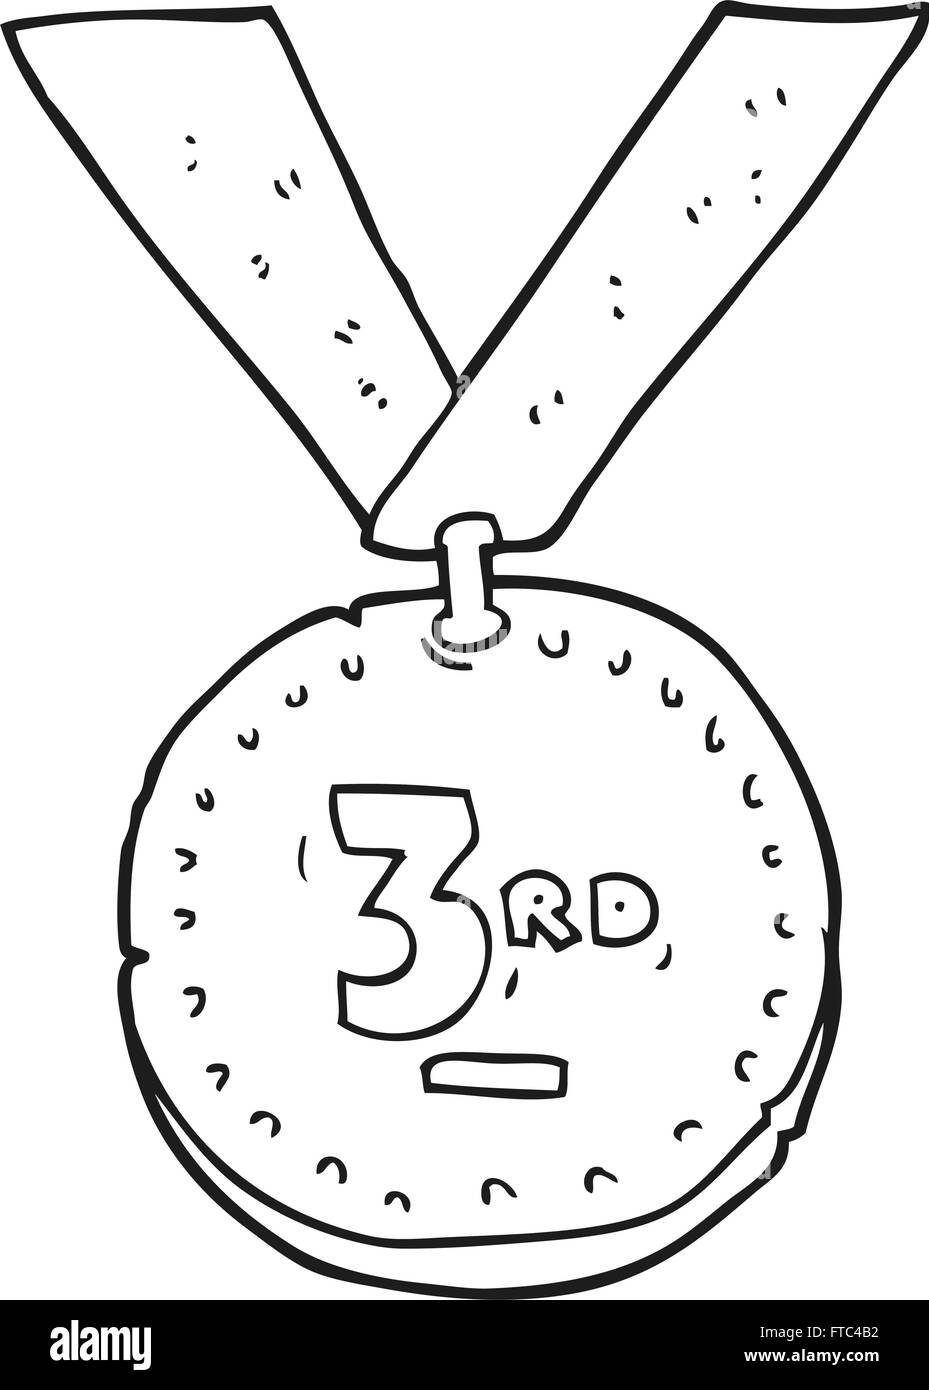 freehand drawn black and white cartoon sports medal Stock Vector